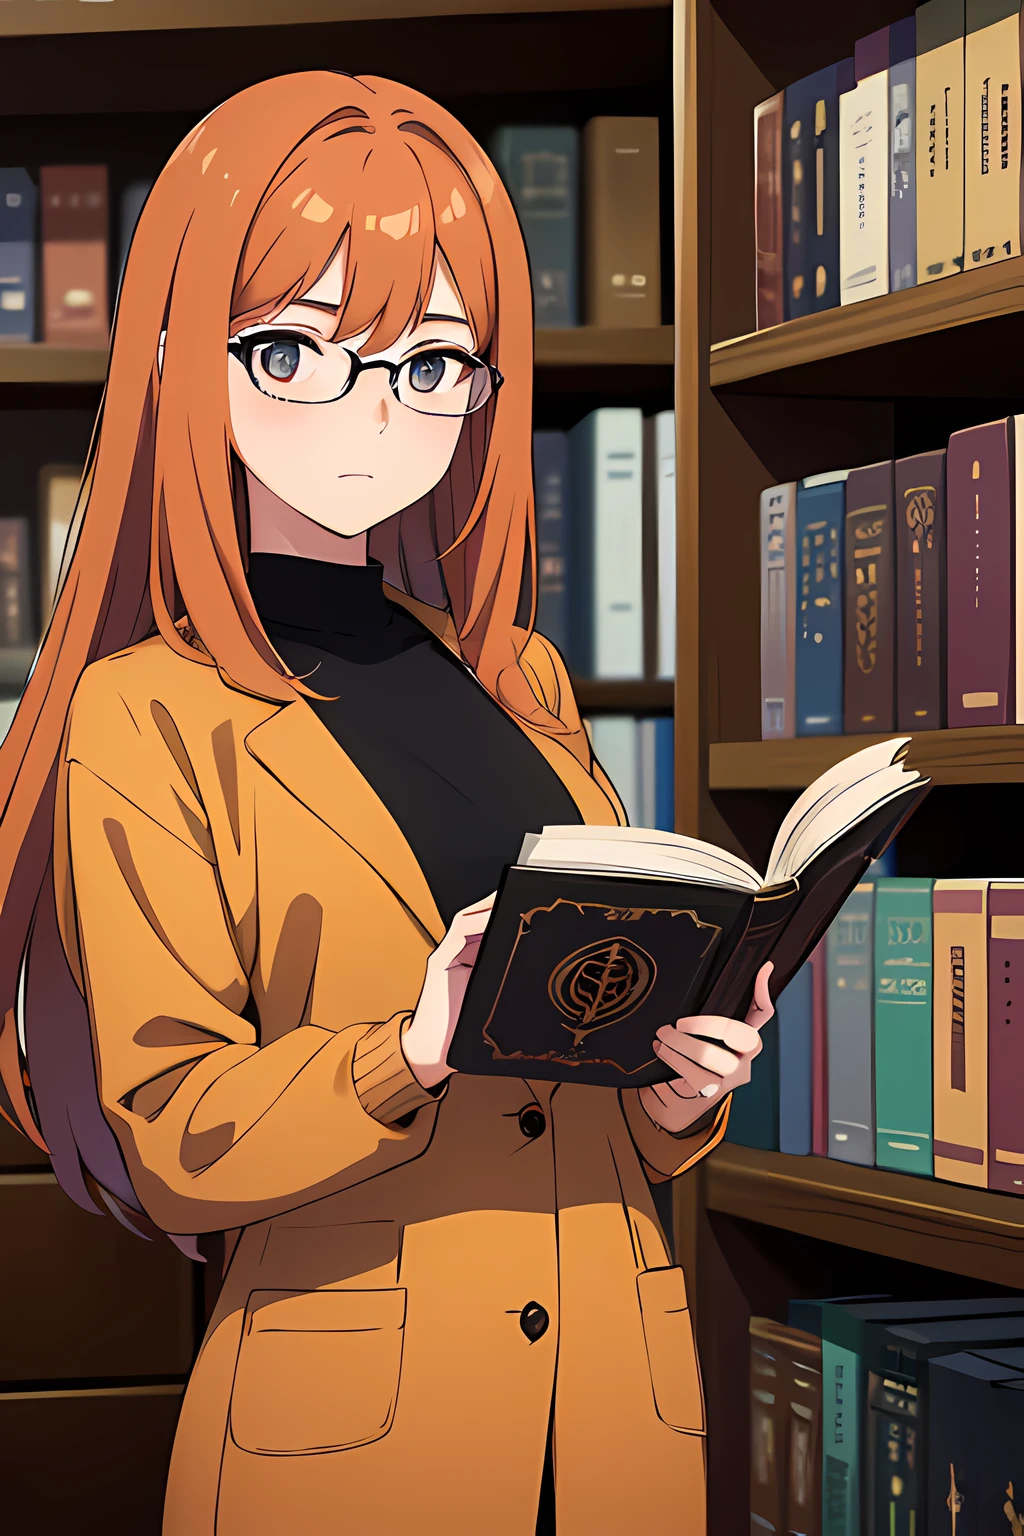 (1 girl, wearing round glasses), (beautiful eyes finely detailed, face to detail, dark orange hair, long hair), wearing librarian outfit, chill facial expression, standing near bookshelf, touching a book in the bookshelf, at the library, many magical particle surrounding her, masterpiece, top-quality, detailed, high resolution illustration